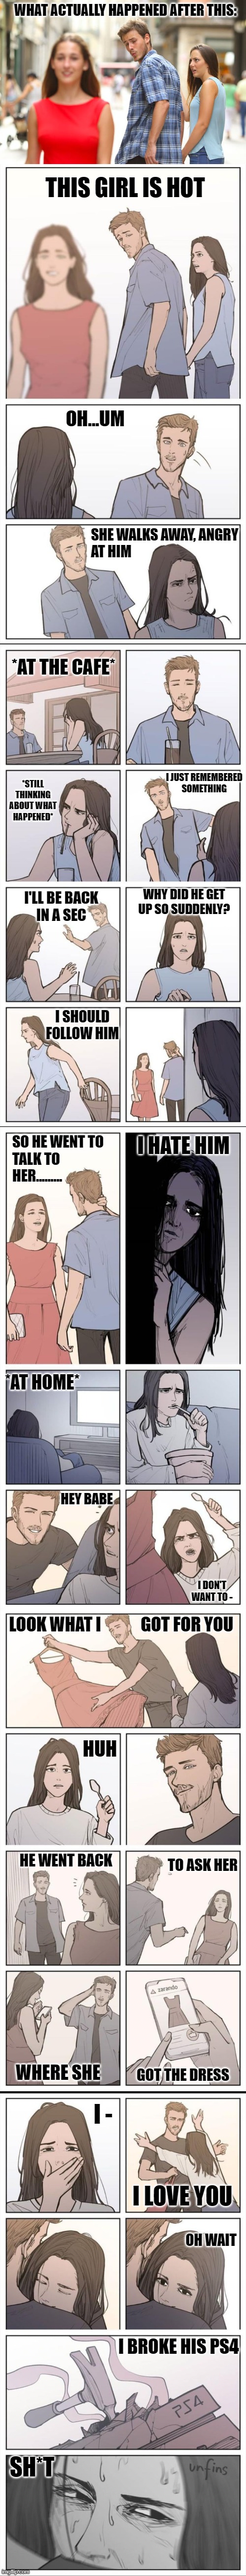 Story of the distracted boyfriend (with captions) | WHAT ACTUALLY HAPPENED AFTER THIS:; THIS GIRL IS HOT; OH...UM; SHE WALKS AWAY, ANGRY
AT HIM; *AT THE CAFE*; *STILL THINKING ABOUT WHAT HAPPENED*; I JUST REMEMBERED
SOMETHING; WHY DID HE GET 
UP SO SUDDENLY? I'LL BE BACK
IN A SEC; I SHOULD FOLLOW HIM; I HATE HIM; SO HE WENT TO 
TALK TO
HER......... *AT HOME*; HEY BABE; I DON'T WANT TO -; LOOK WHAT I            GOT FOR YOU; HUH; HE WENT BACK; TO ASK HER; GOT THE DRESS; WHERE SHE; I -; I LOVE YOU; OH WAIT; I BROKE HIS PS4; SH*T | image tagged in memes,distracted boyfriend | made w/ Imgflip meme maker